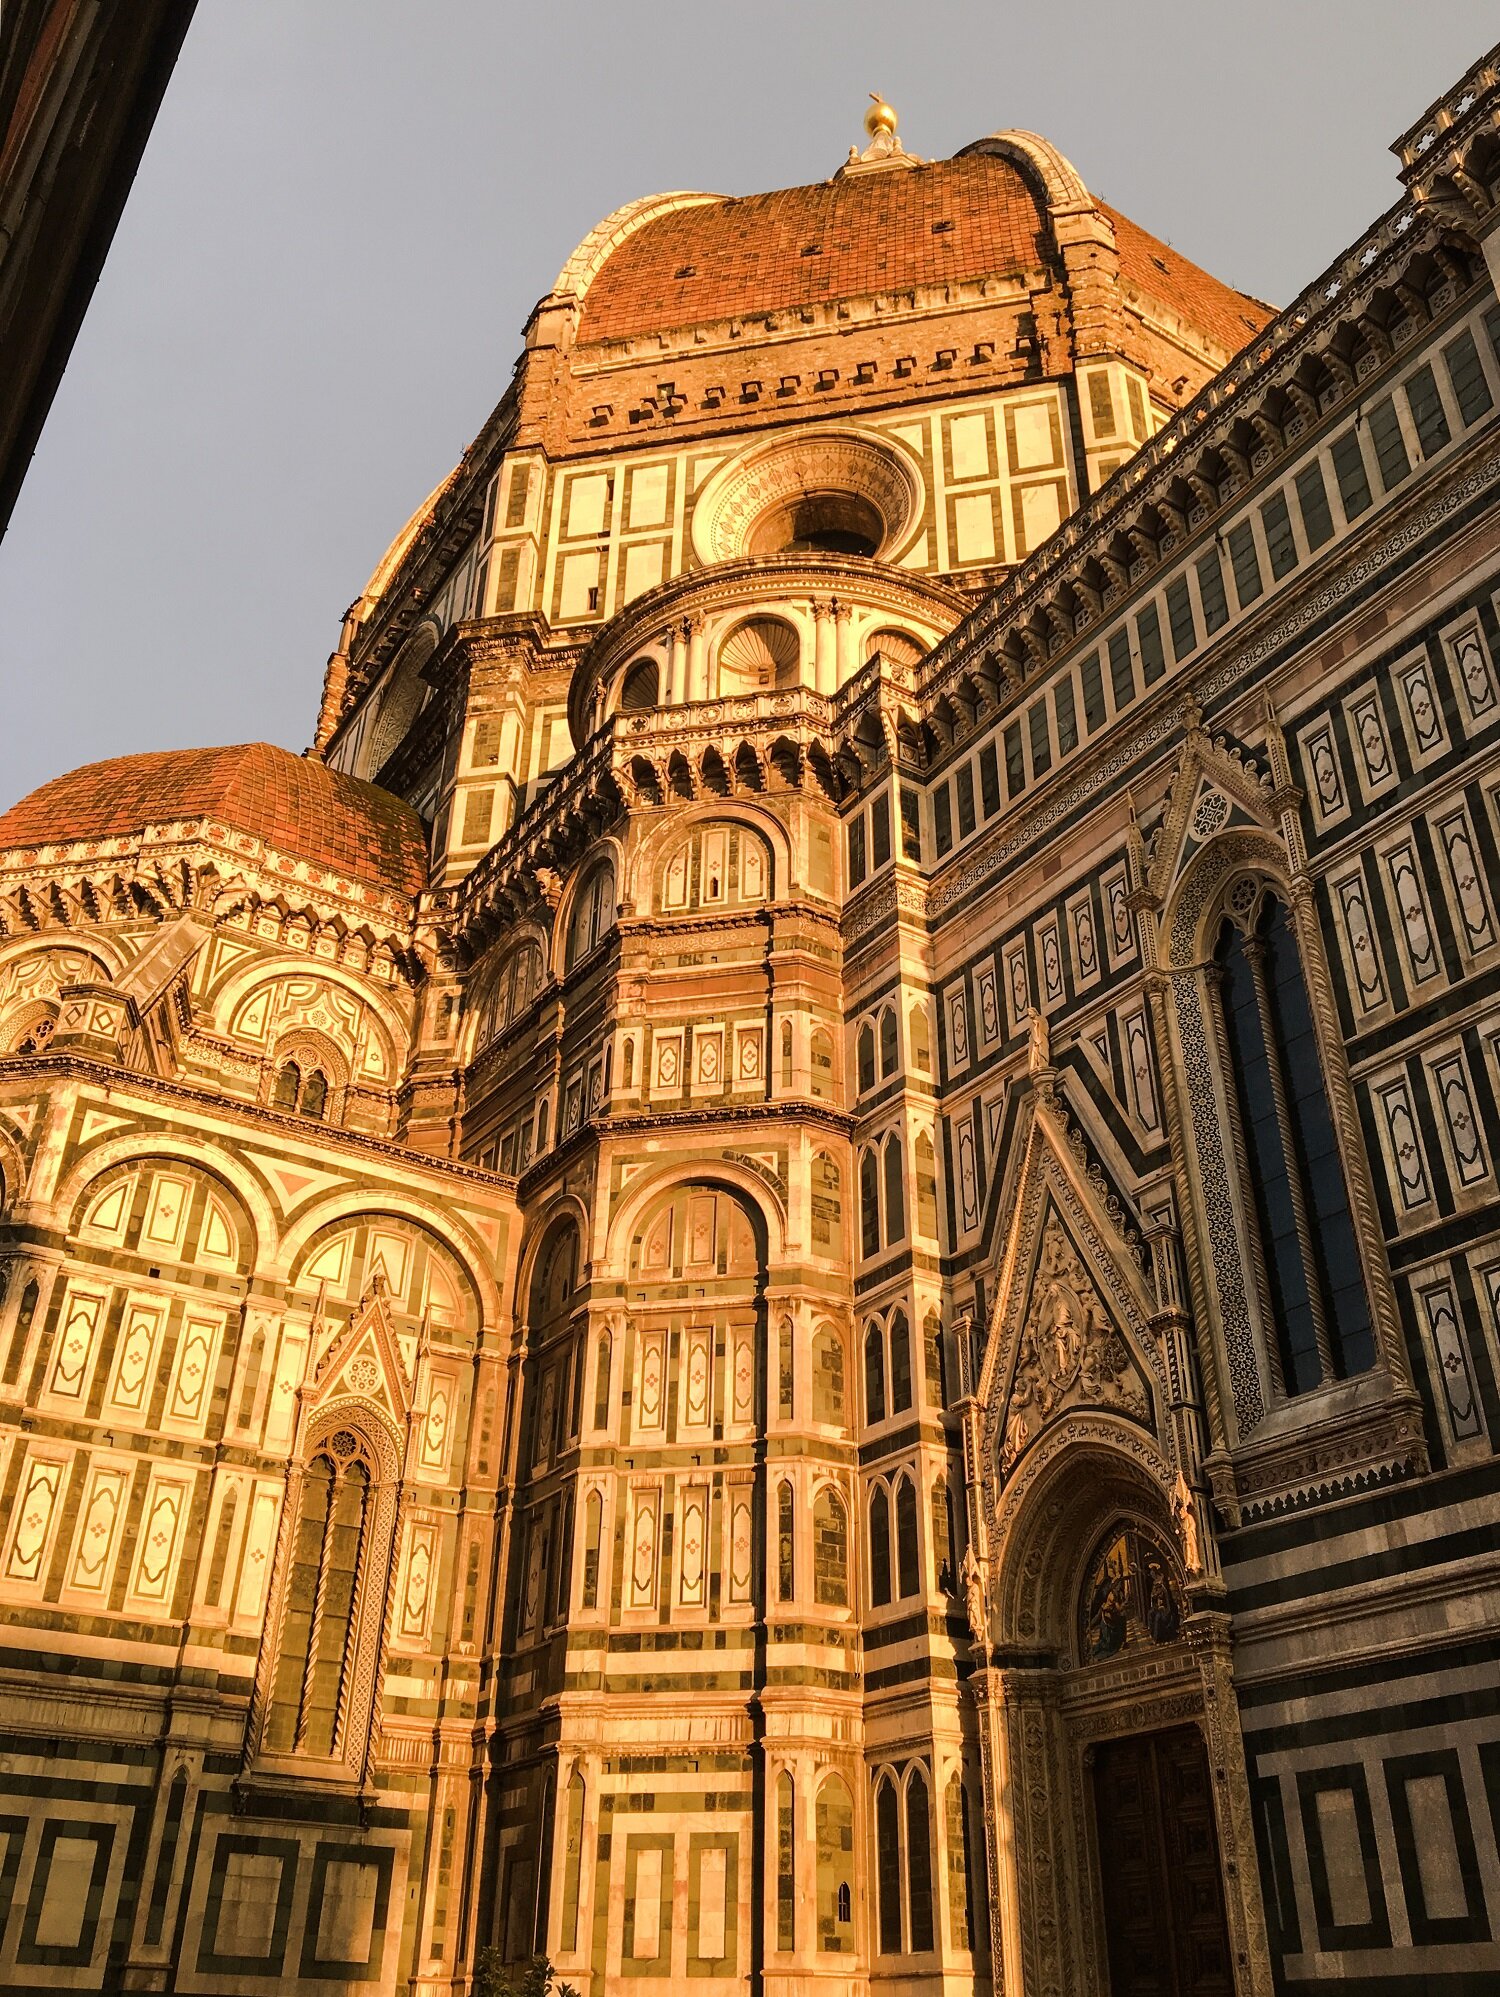 Cathedral of Santa Maria del Fiore at sunset, Florence Italy | Blooming Magnolias Blog | Travel, Firenze, Italia